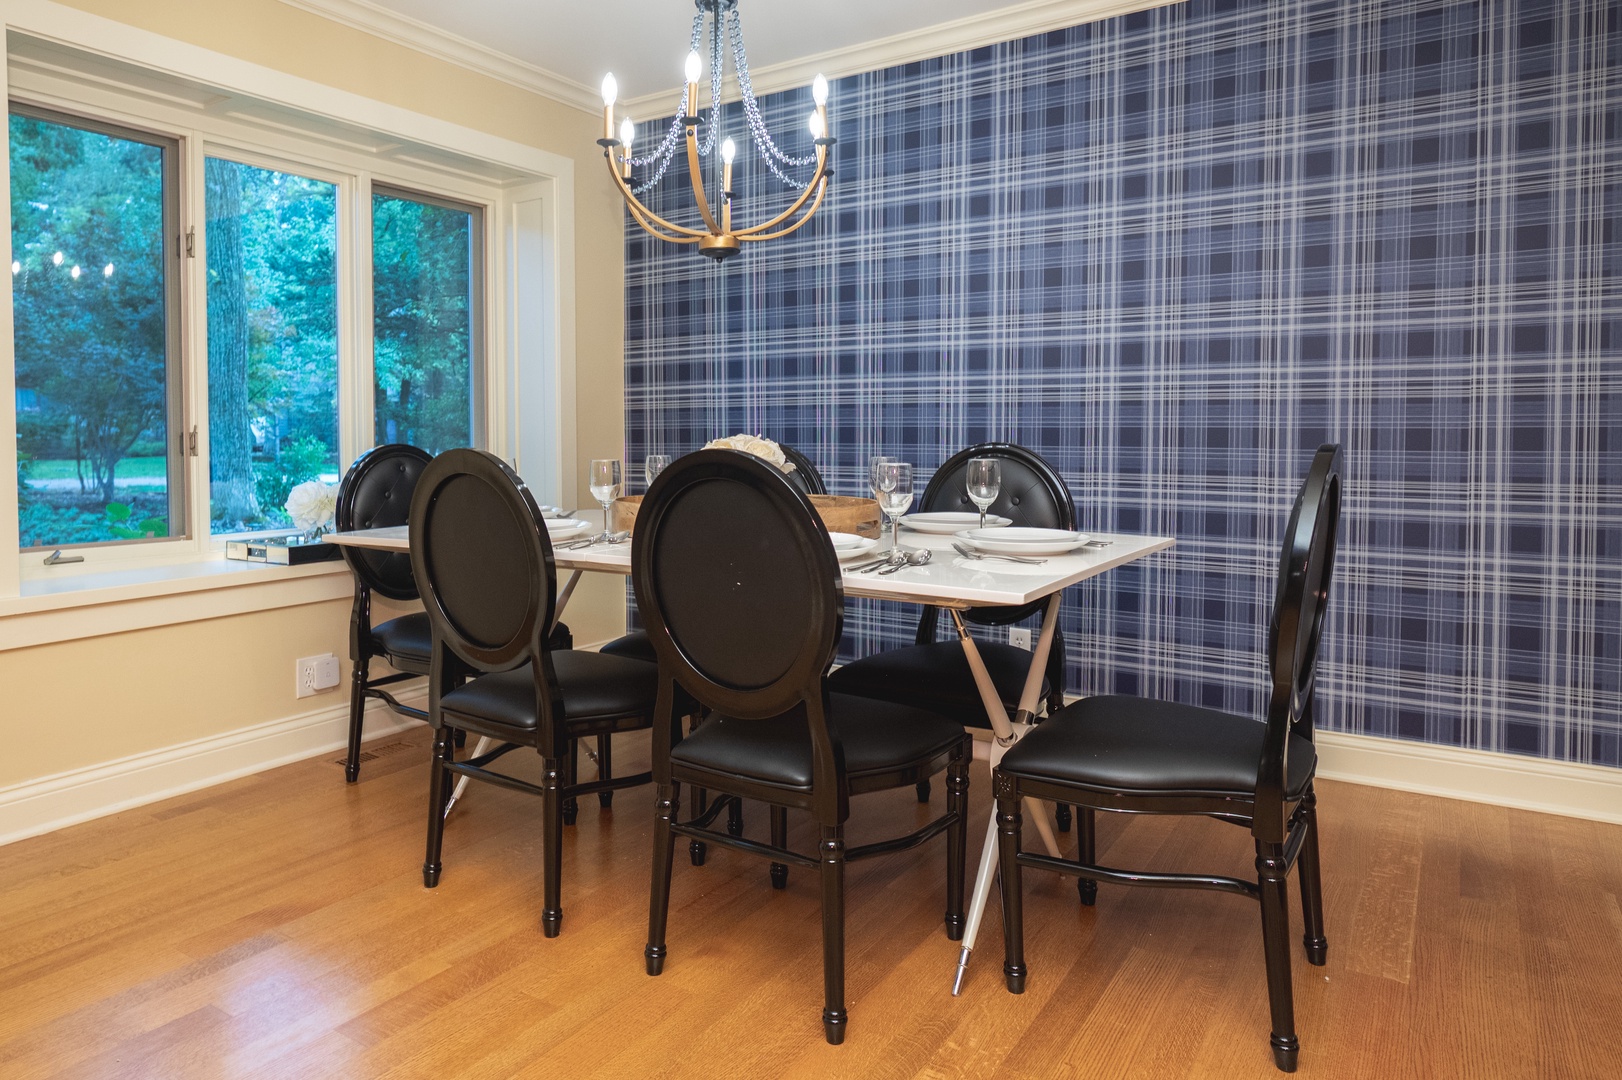 Elegant meals can be enjoyed at the dining table, offering seating for 6